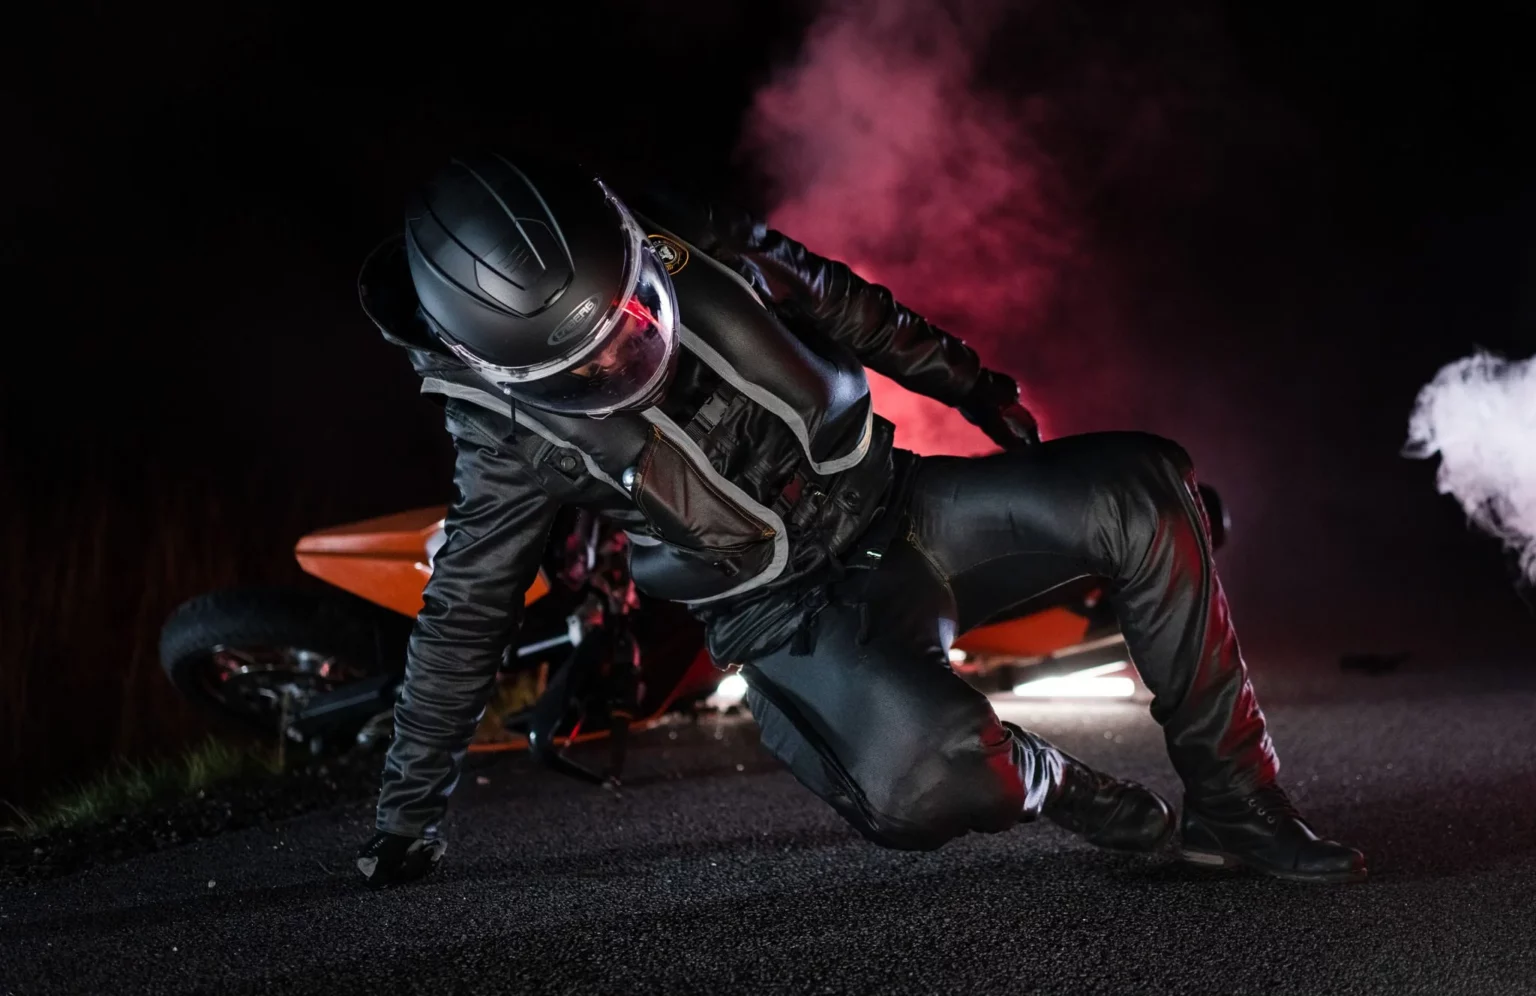 swedish-company-launches-worlds-first-airbag-jeans-for-motorcyclists